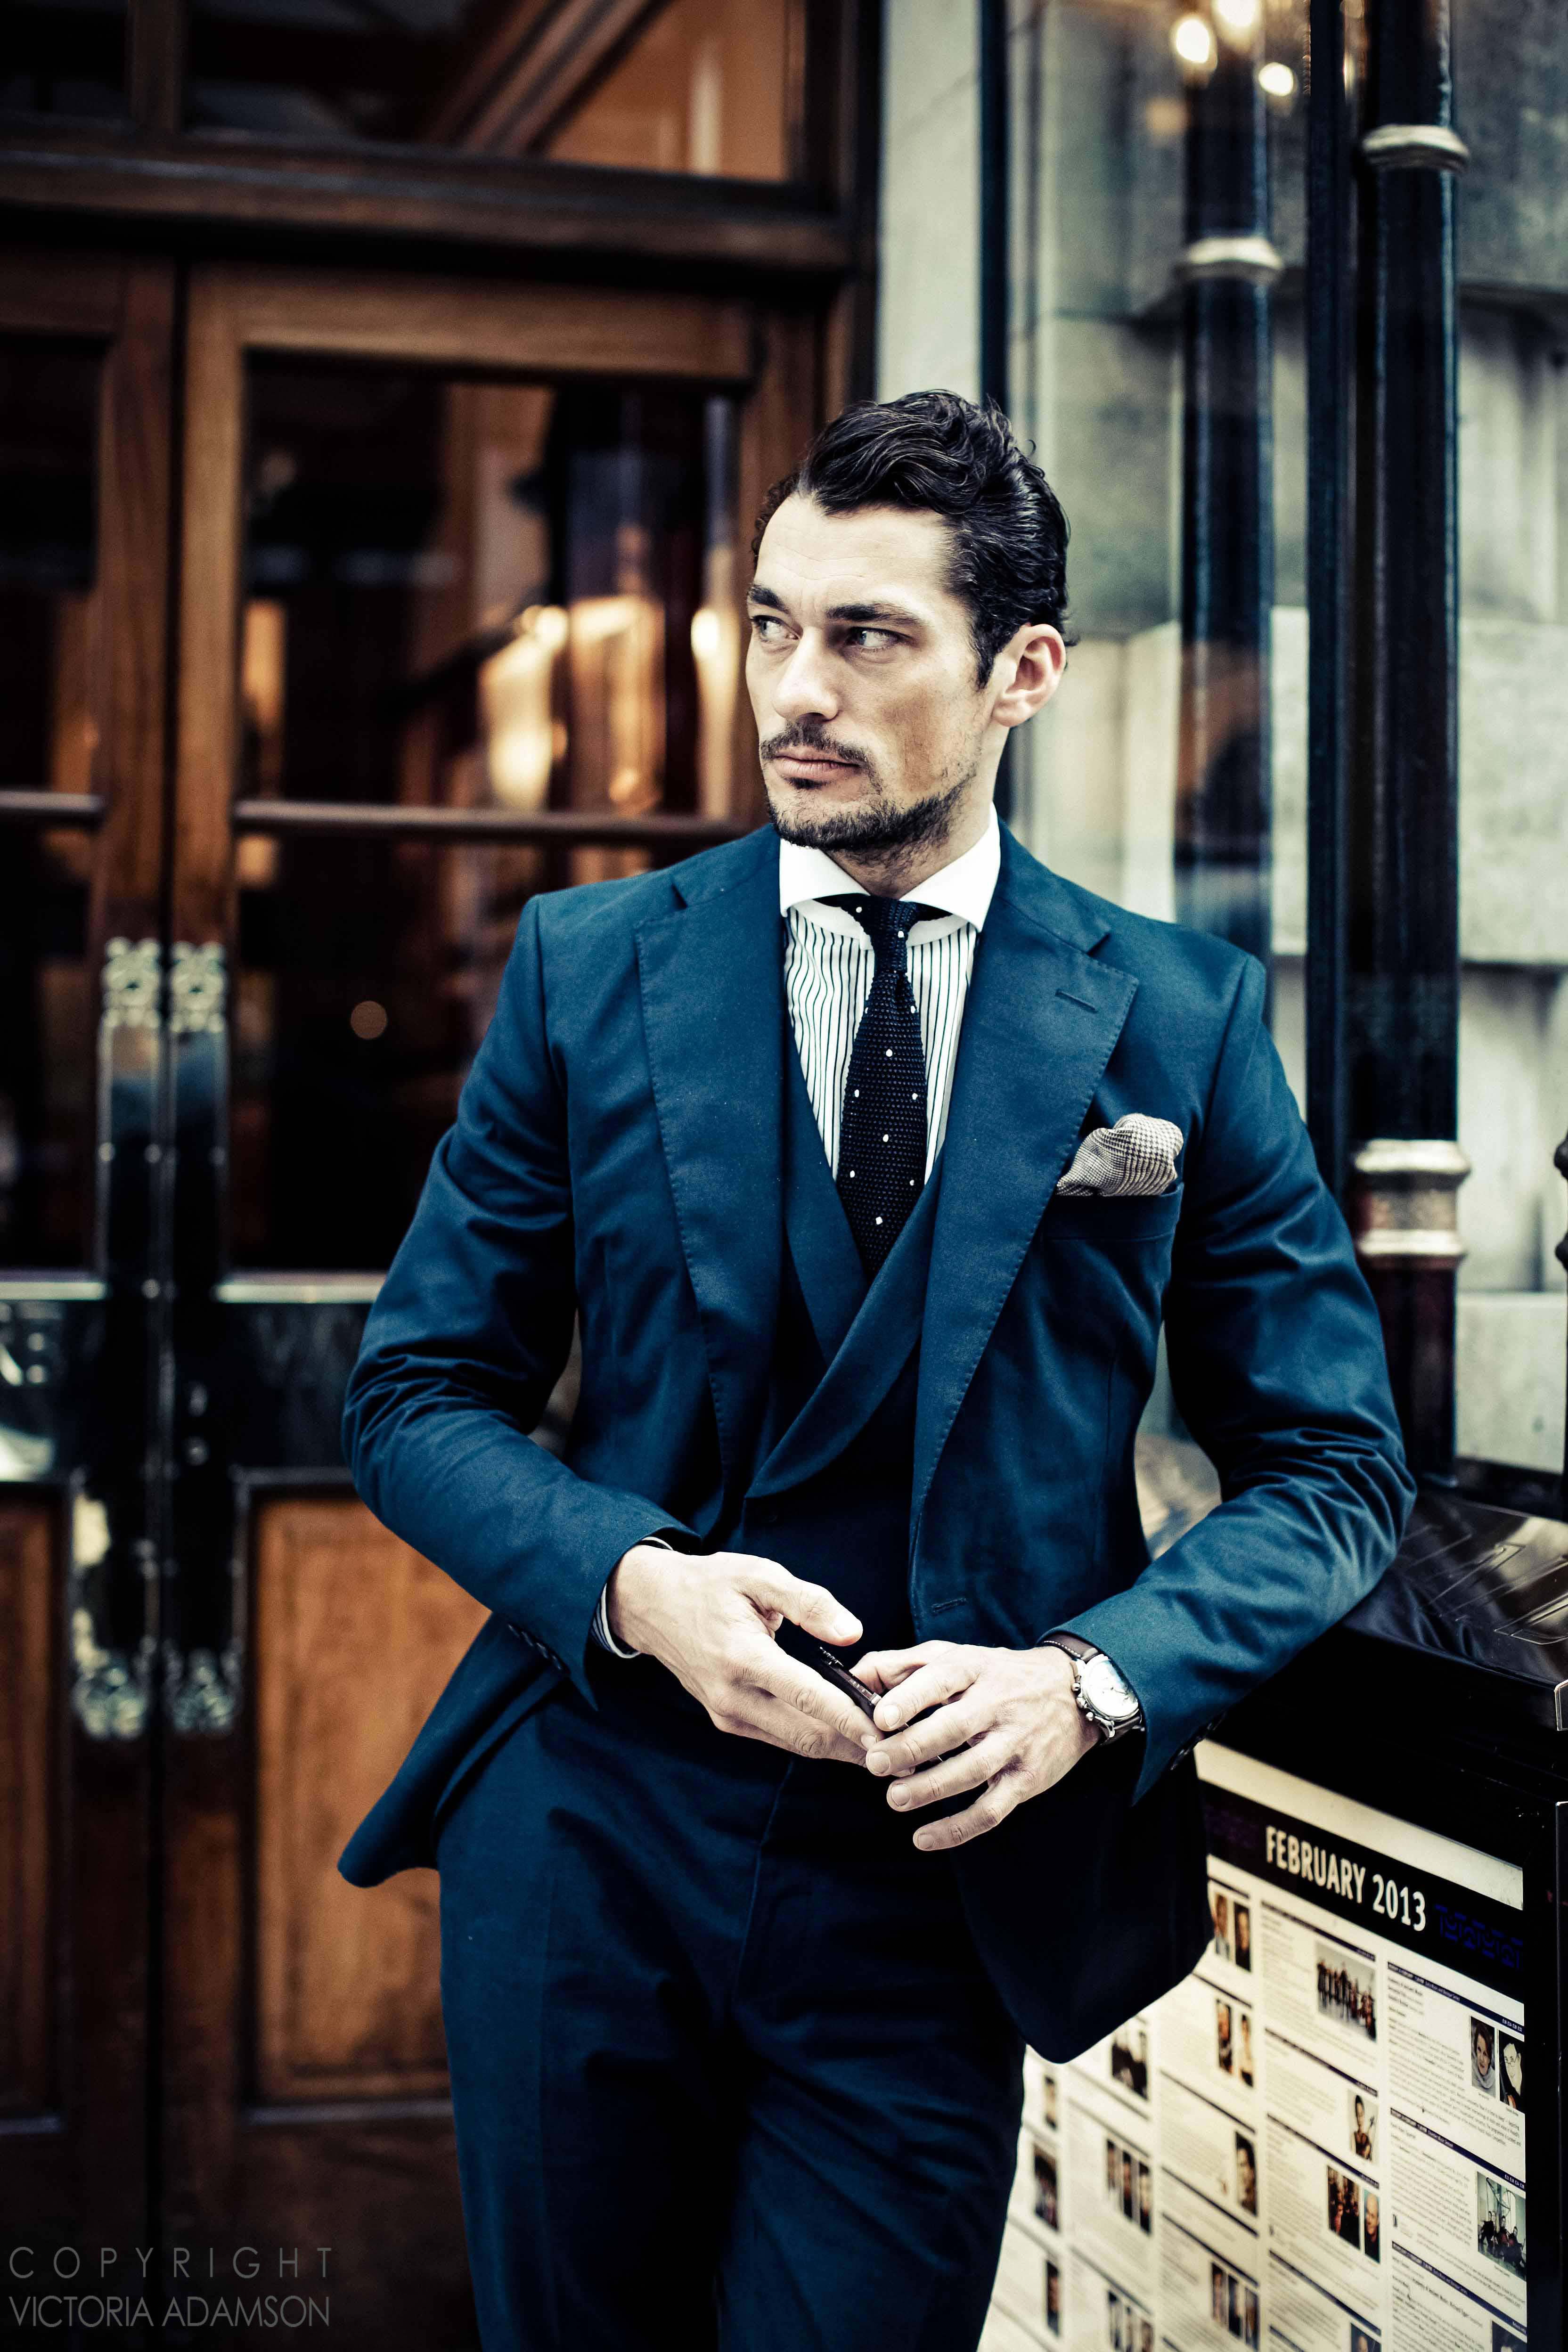 David Gandy Wallpapers High Quality | Download Free